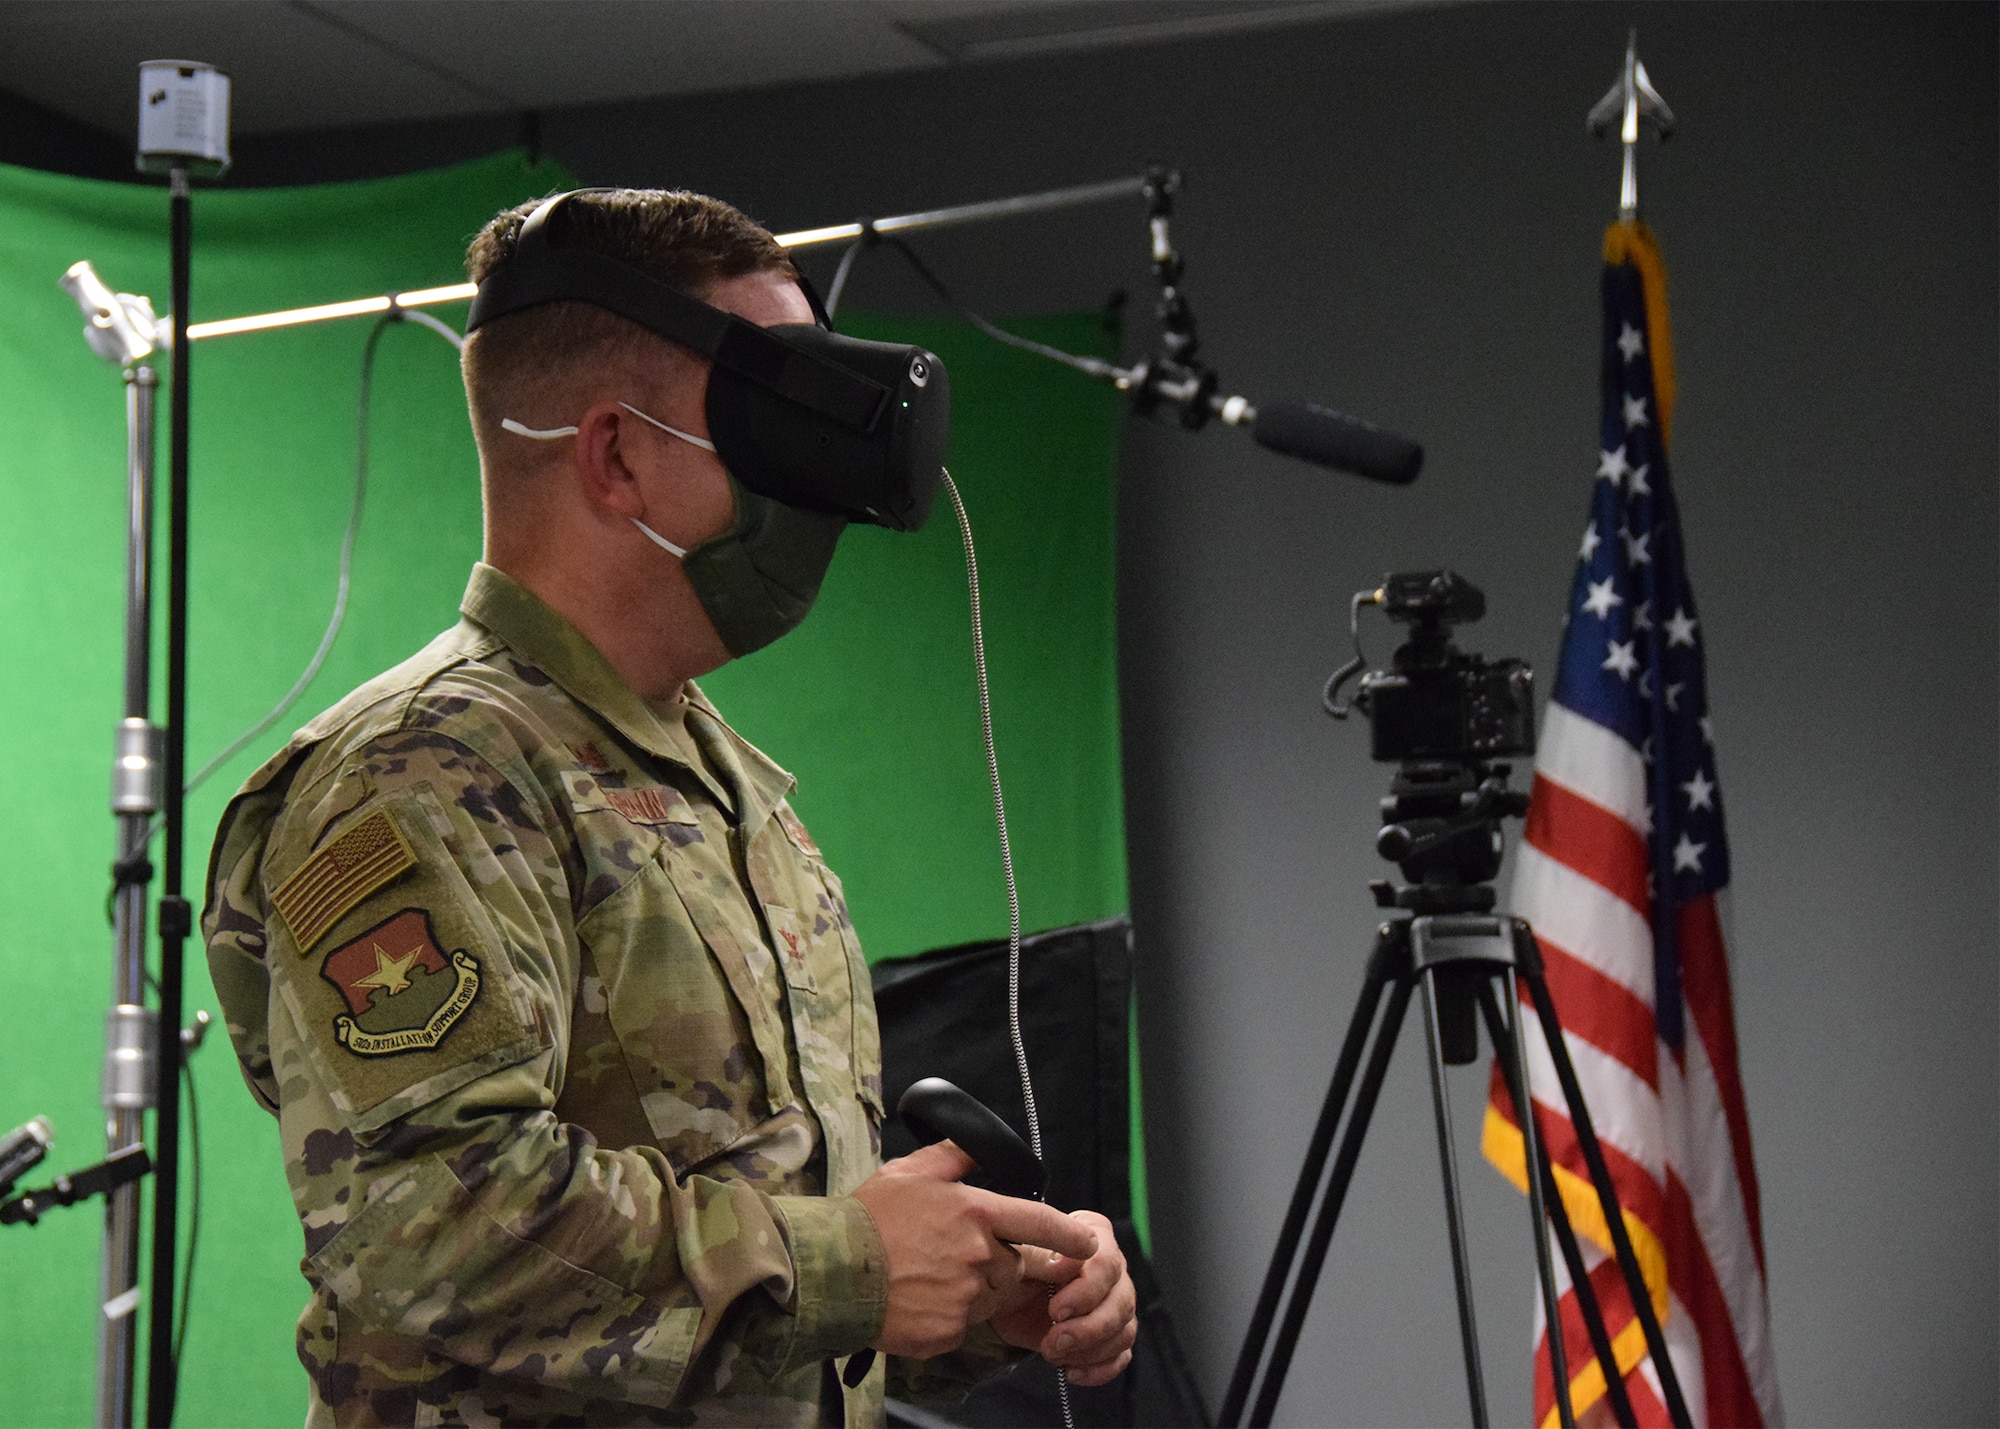 Col. Steven A. Strain, 502nd Installation Support Group commander, experiences the virtual reality training system at the 733rd Training Squadron during a tour of the 433rd Airlift Wing Oct. 21, 2020 at Joint Base San Antonio-Lackland, Texas. The purpose of the tour was to familiarize the new 502nd ISG leadership with the 433rd AW. (U.S. Air Force photo by Iram Carmona)